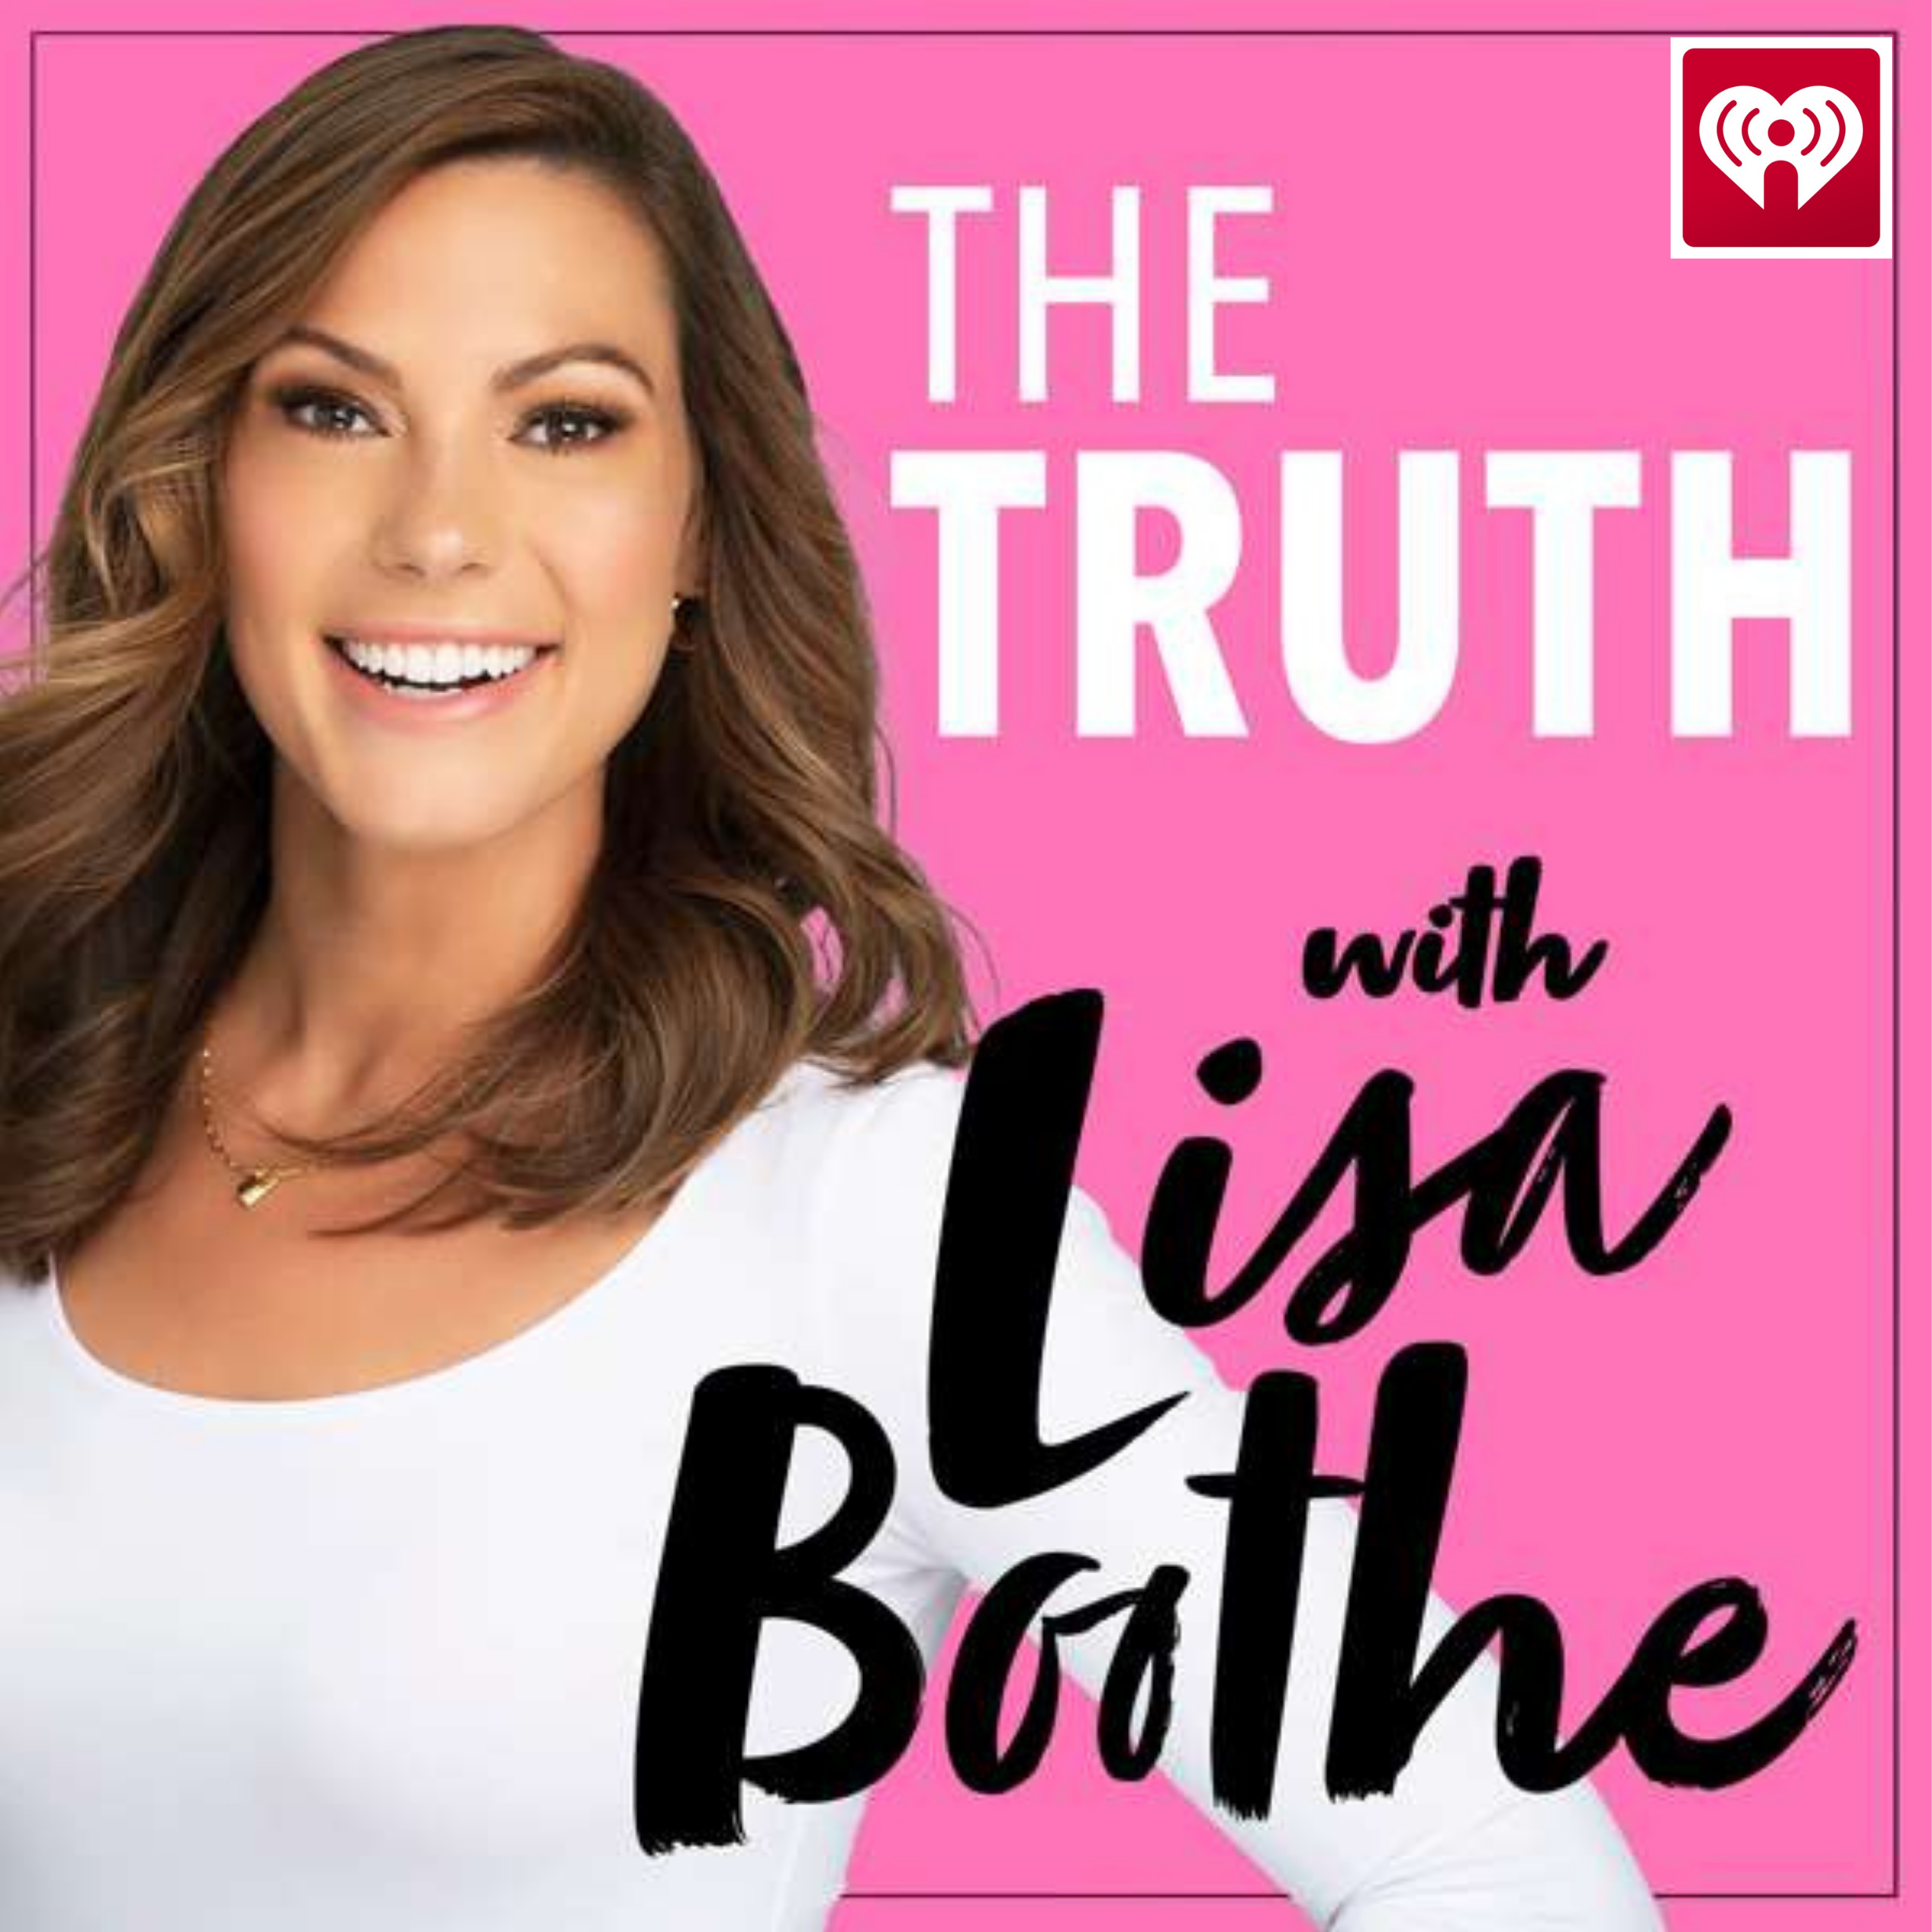 The Truth with Lisa Boothe: California's Gender-Neutral Toy Section with Greg Burt